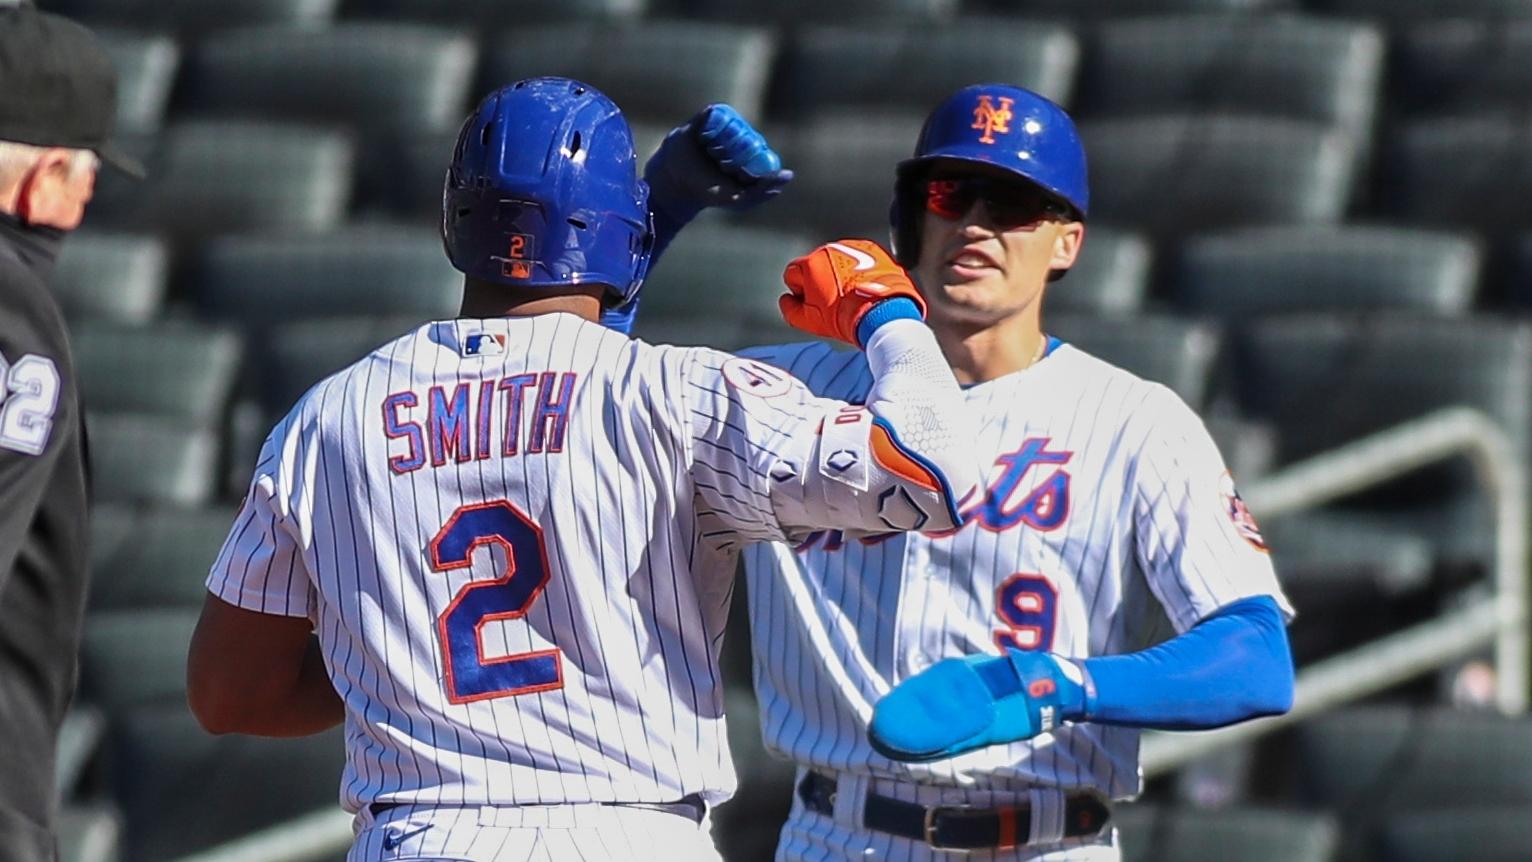 Apr 13, 2021; New York City, New York, USA; New York Mets center fielder Brandon Nimmo (9) congratulates left fielder Dominic Smith (2) after his two run home run in the first inning against the Philadelphia Phillies at Citi Field. / Wendell Cruz-USA TODAY Sports